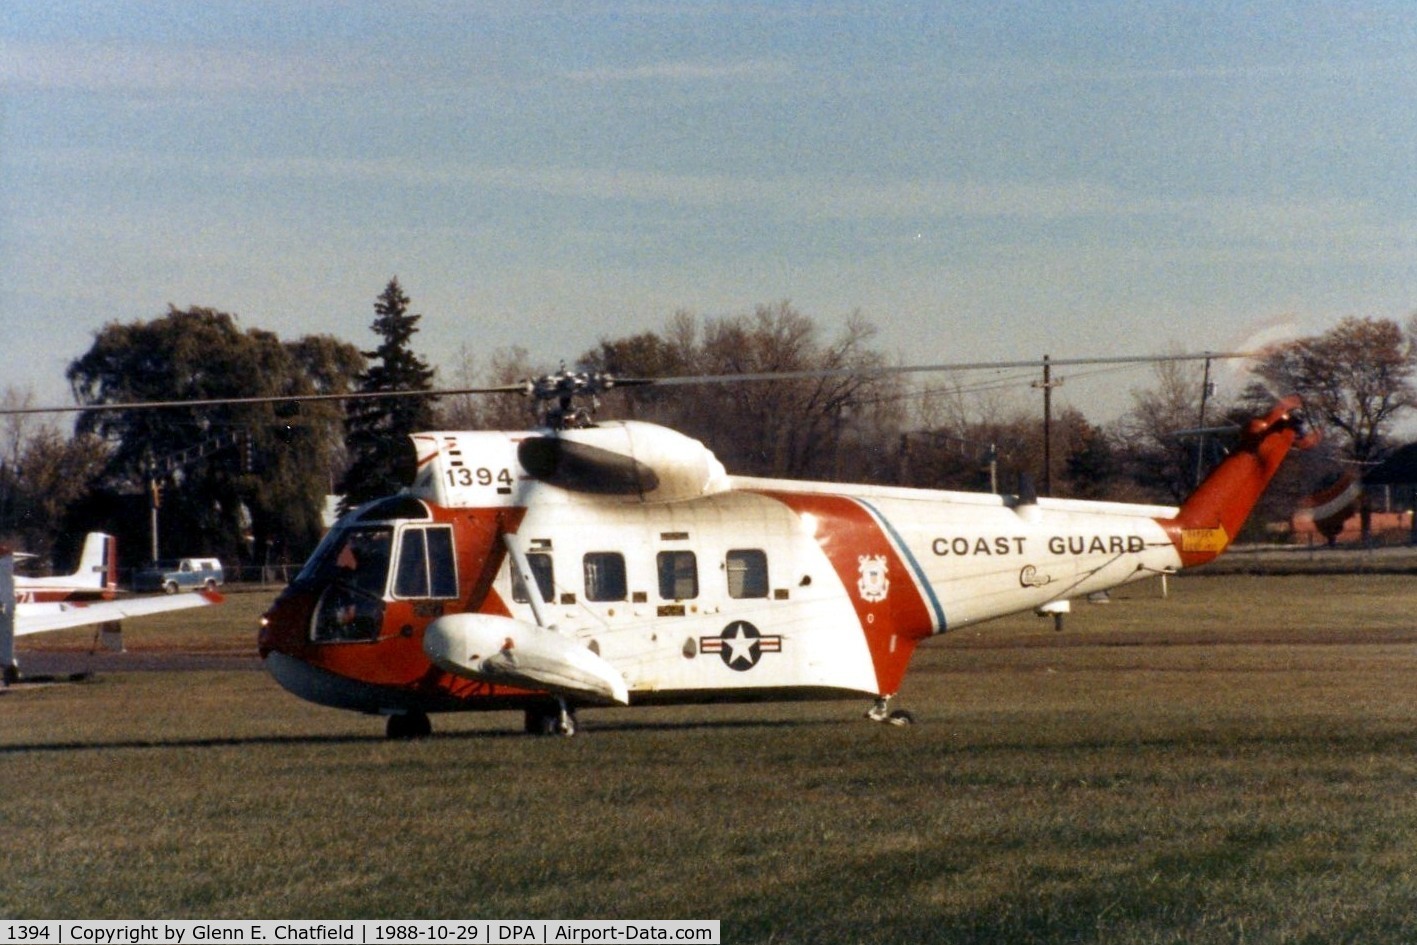 1394, 1964 Sikorsky HH-52A Sea Guard C/N 62.075, HH-52A 1394 on a stop over with 1384